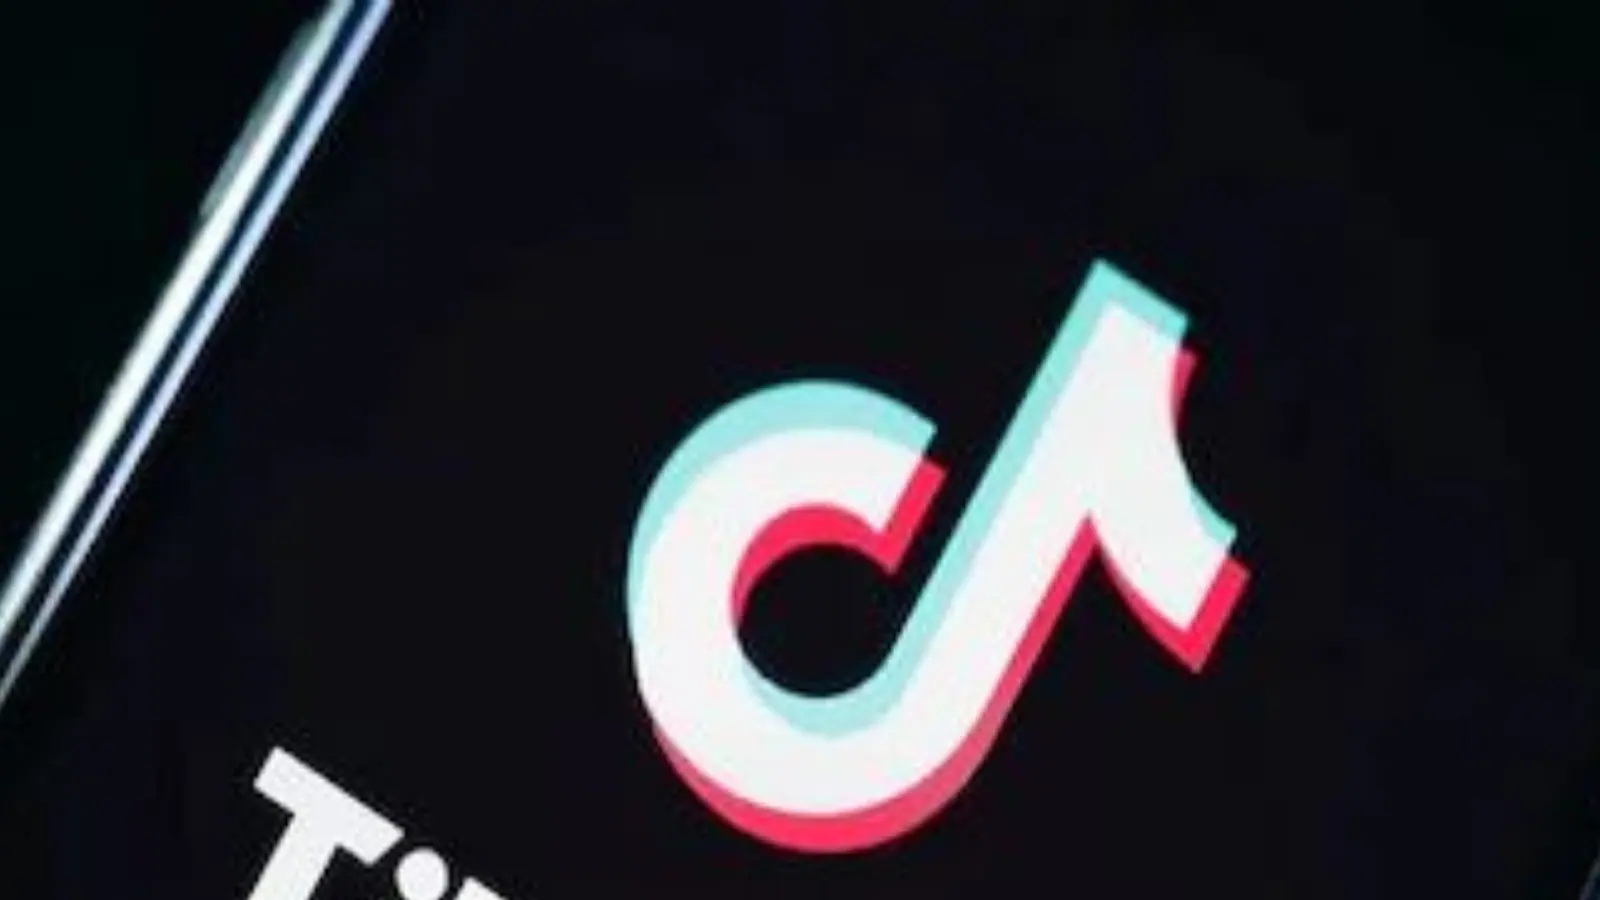 TikTok Delays Changes to Privacy Policy Over Europe Data Concerns